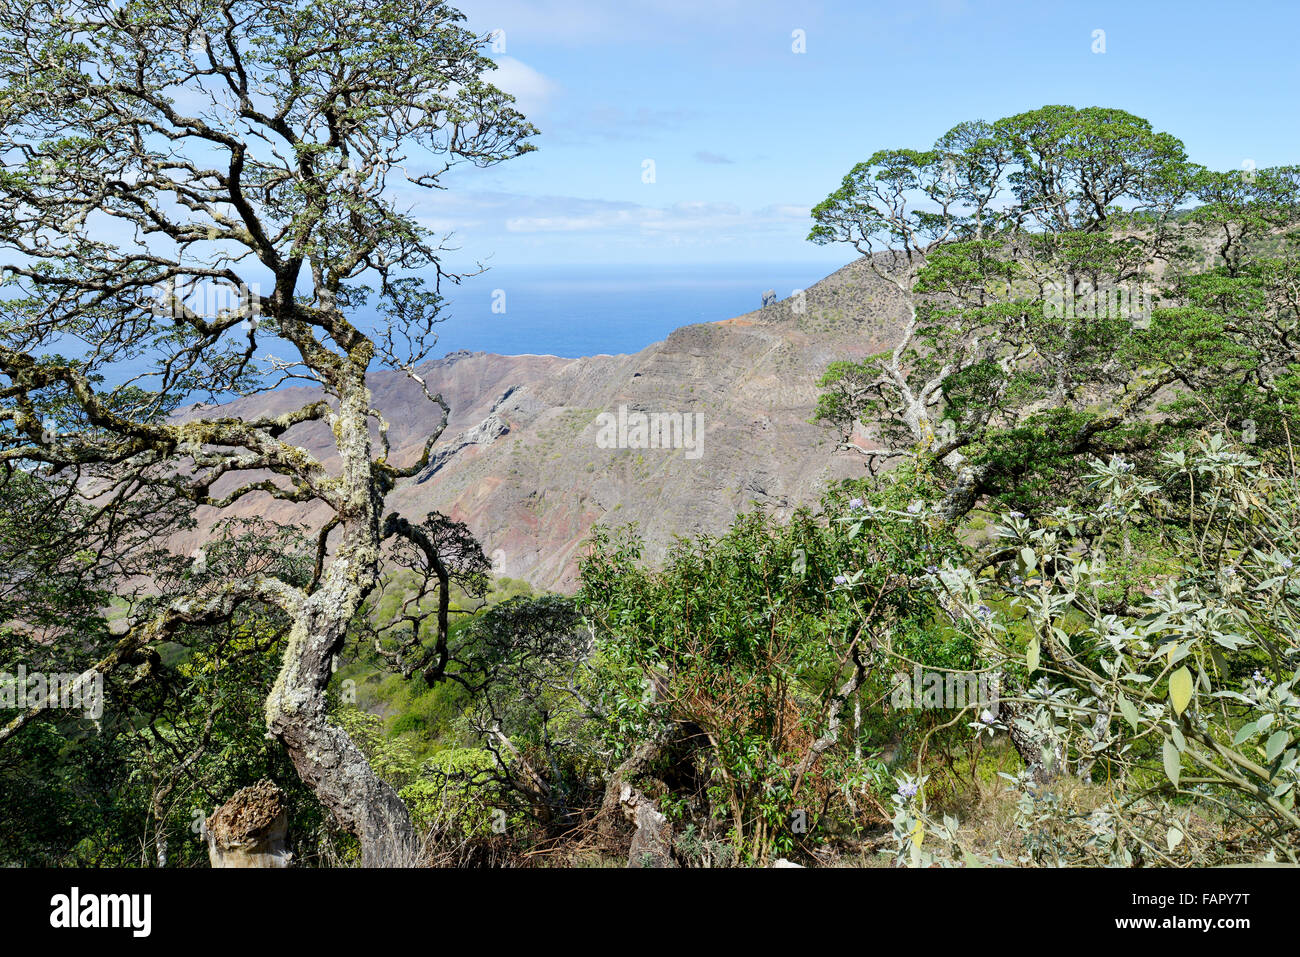 Endemic Gumwood trees on the island of St Helena in the South Atlantic Ocean Stock Photo